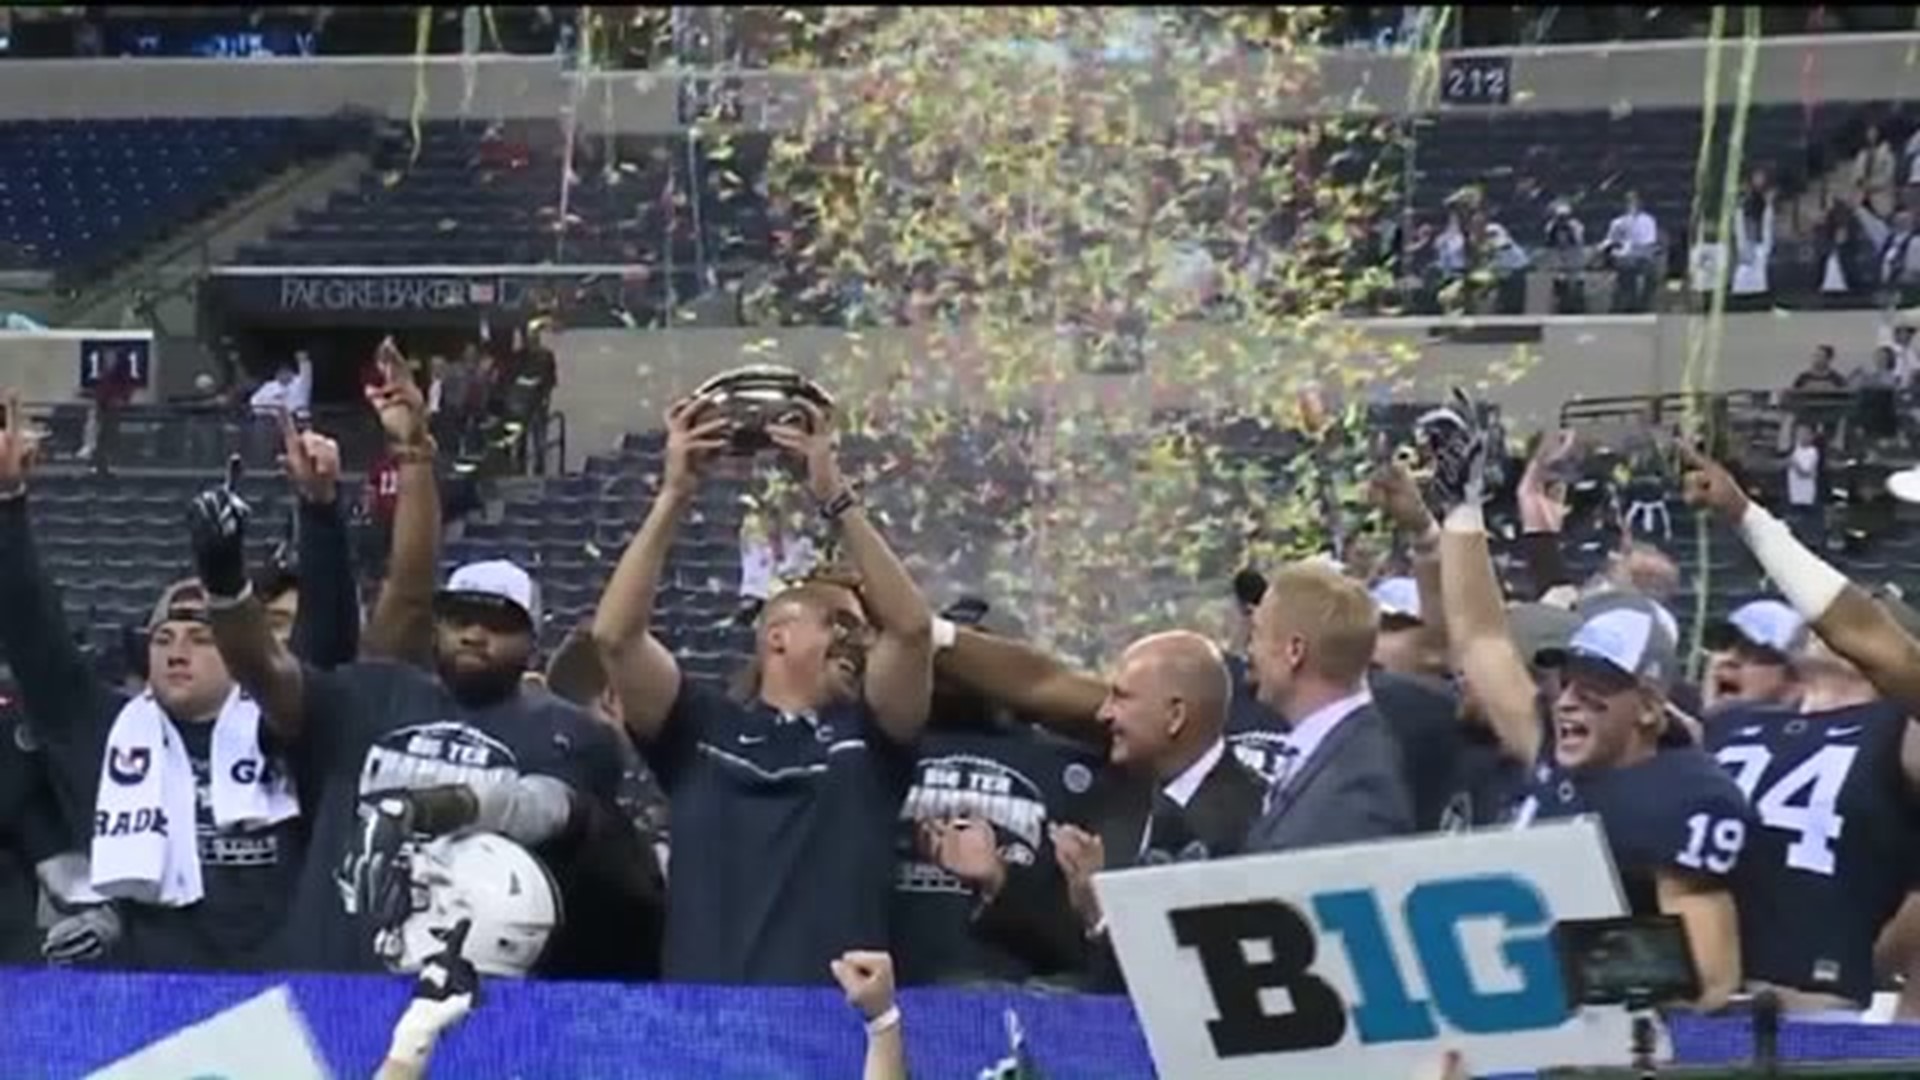 Penn State Wins B1G Championship With Second Half Comeback